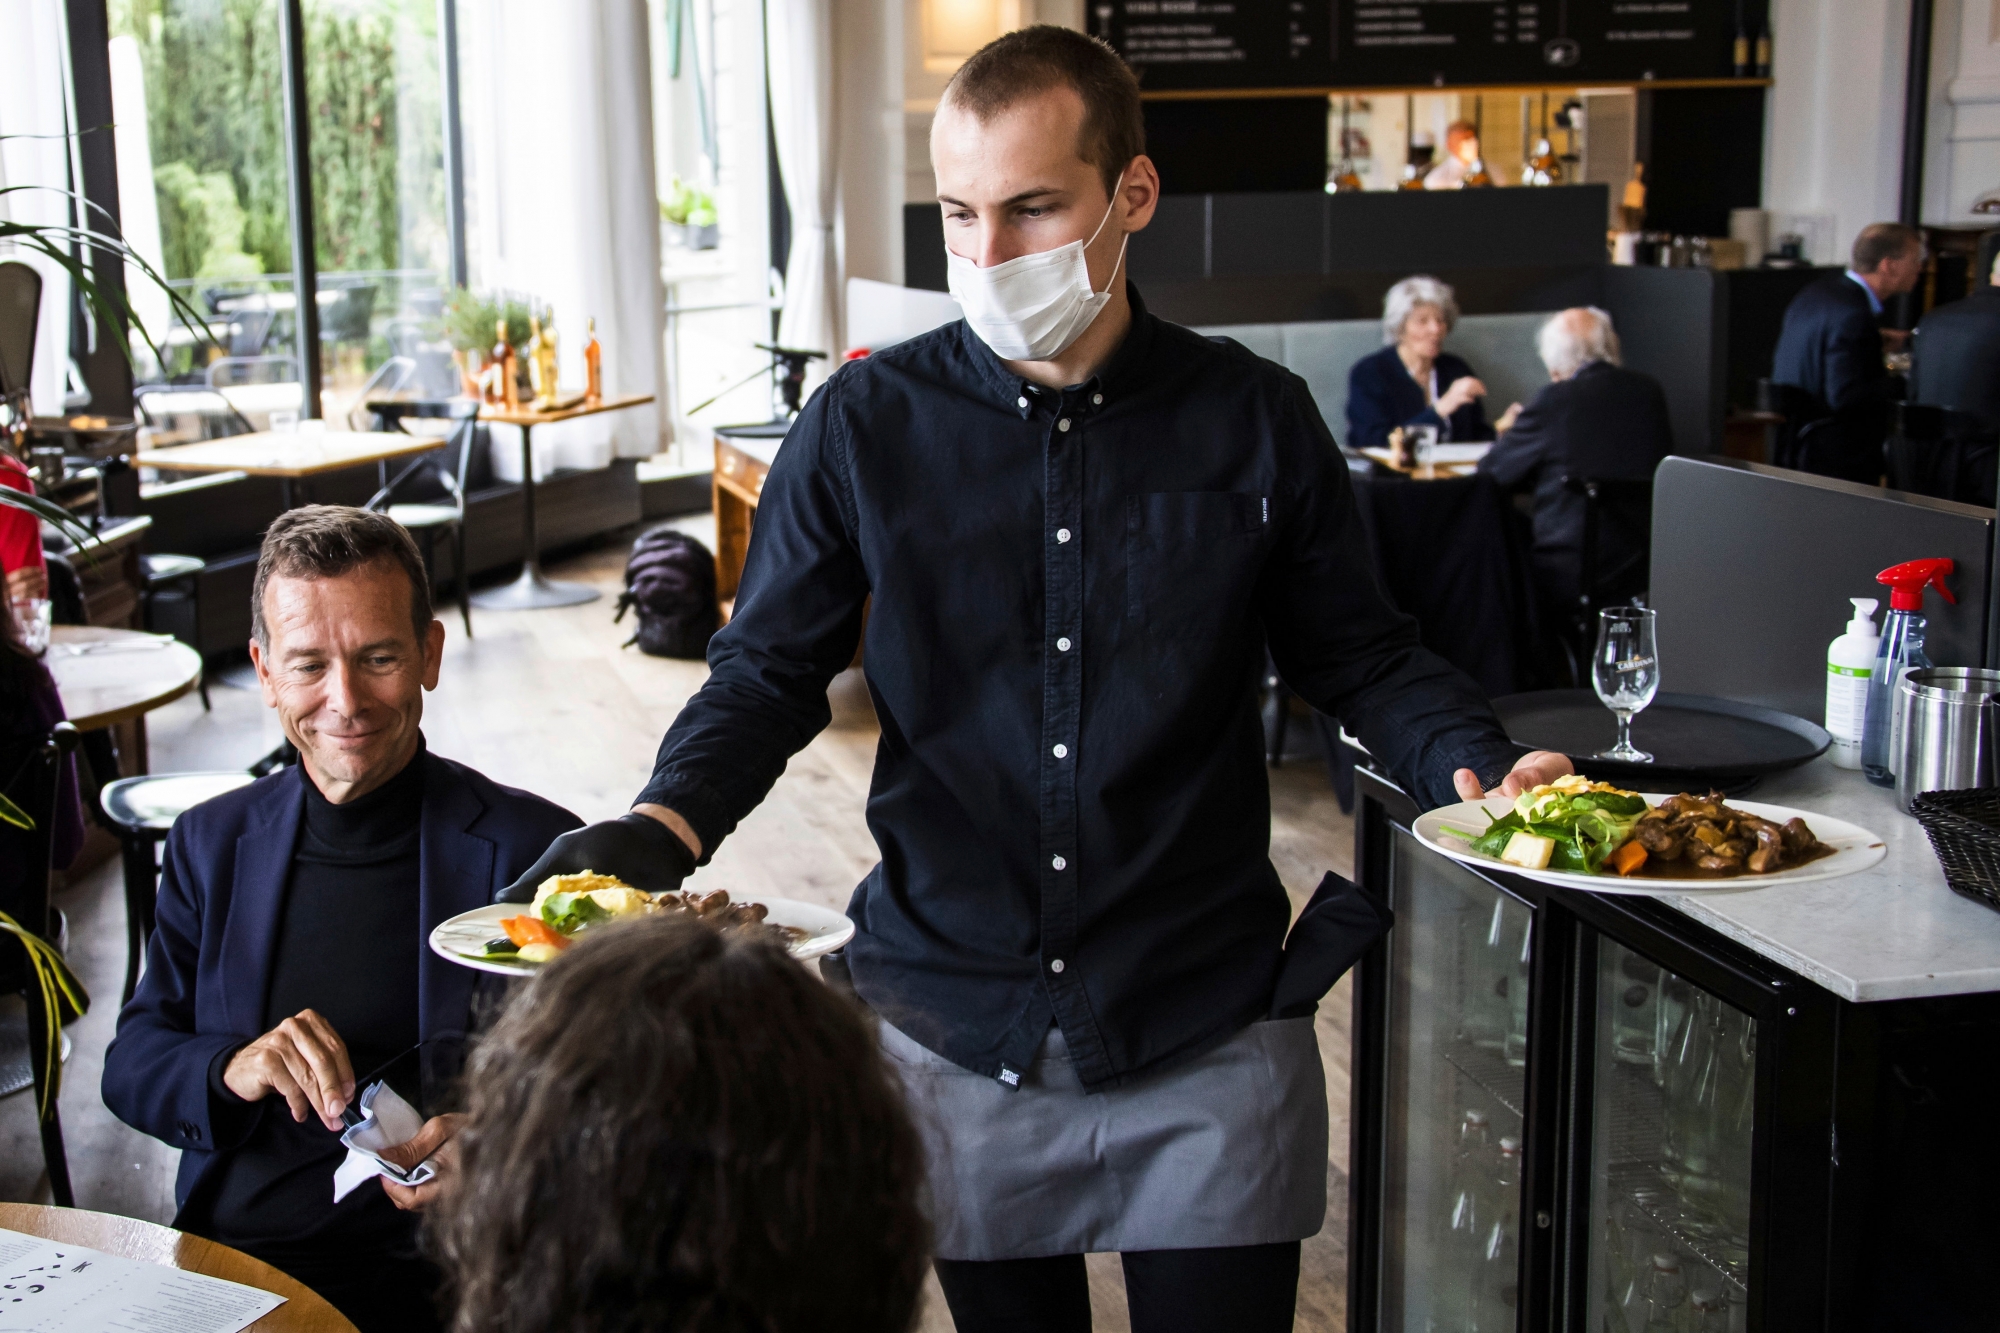 A waiter of "La Brasserie de Montbenon" restaurant brings dishes food to customers during the spread of the pandemic Coronavirus (COVID-19) disease in Lausanne, Switzerland, Monday, May 11, 2020. In Switzerland from today, the Swiss authorities lifted second part of the lockdown. (KEYSTONE/Jean-Christophe Bott)
ArcInfo